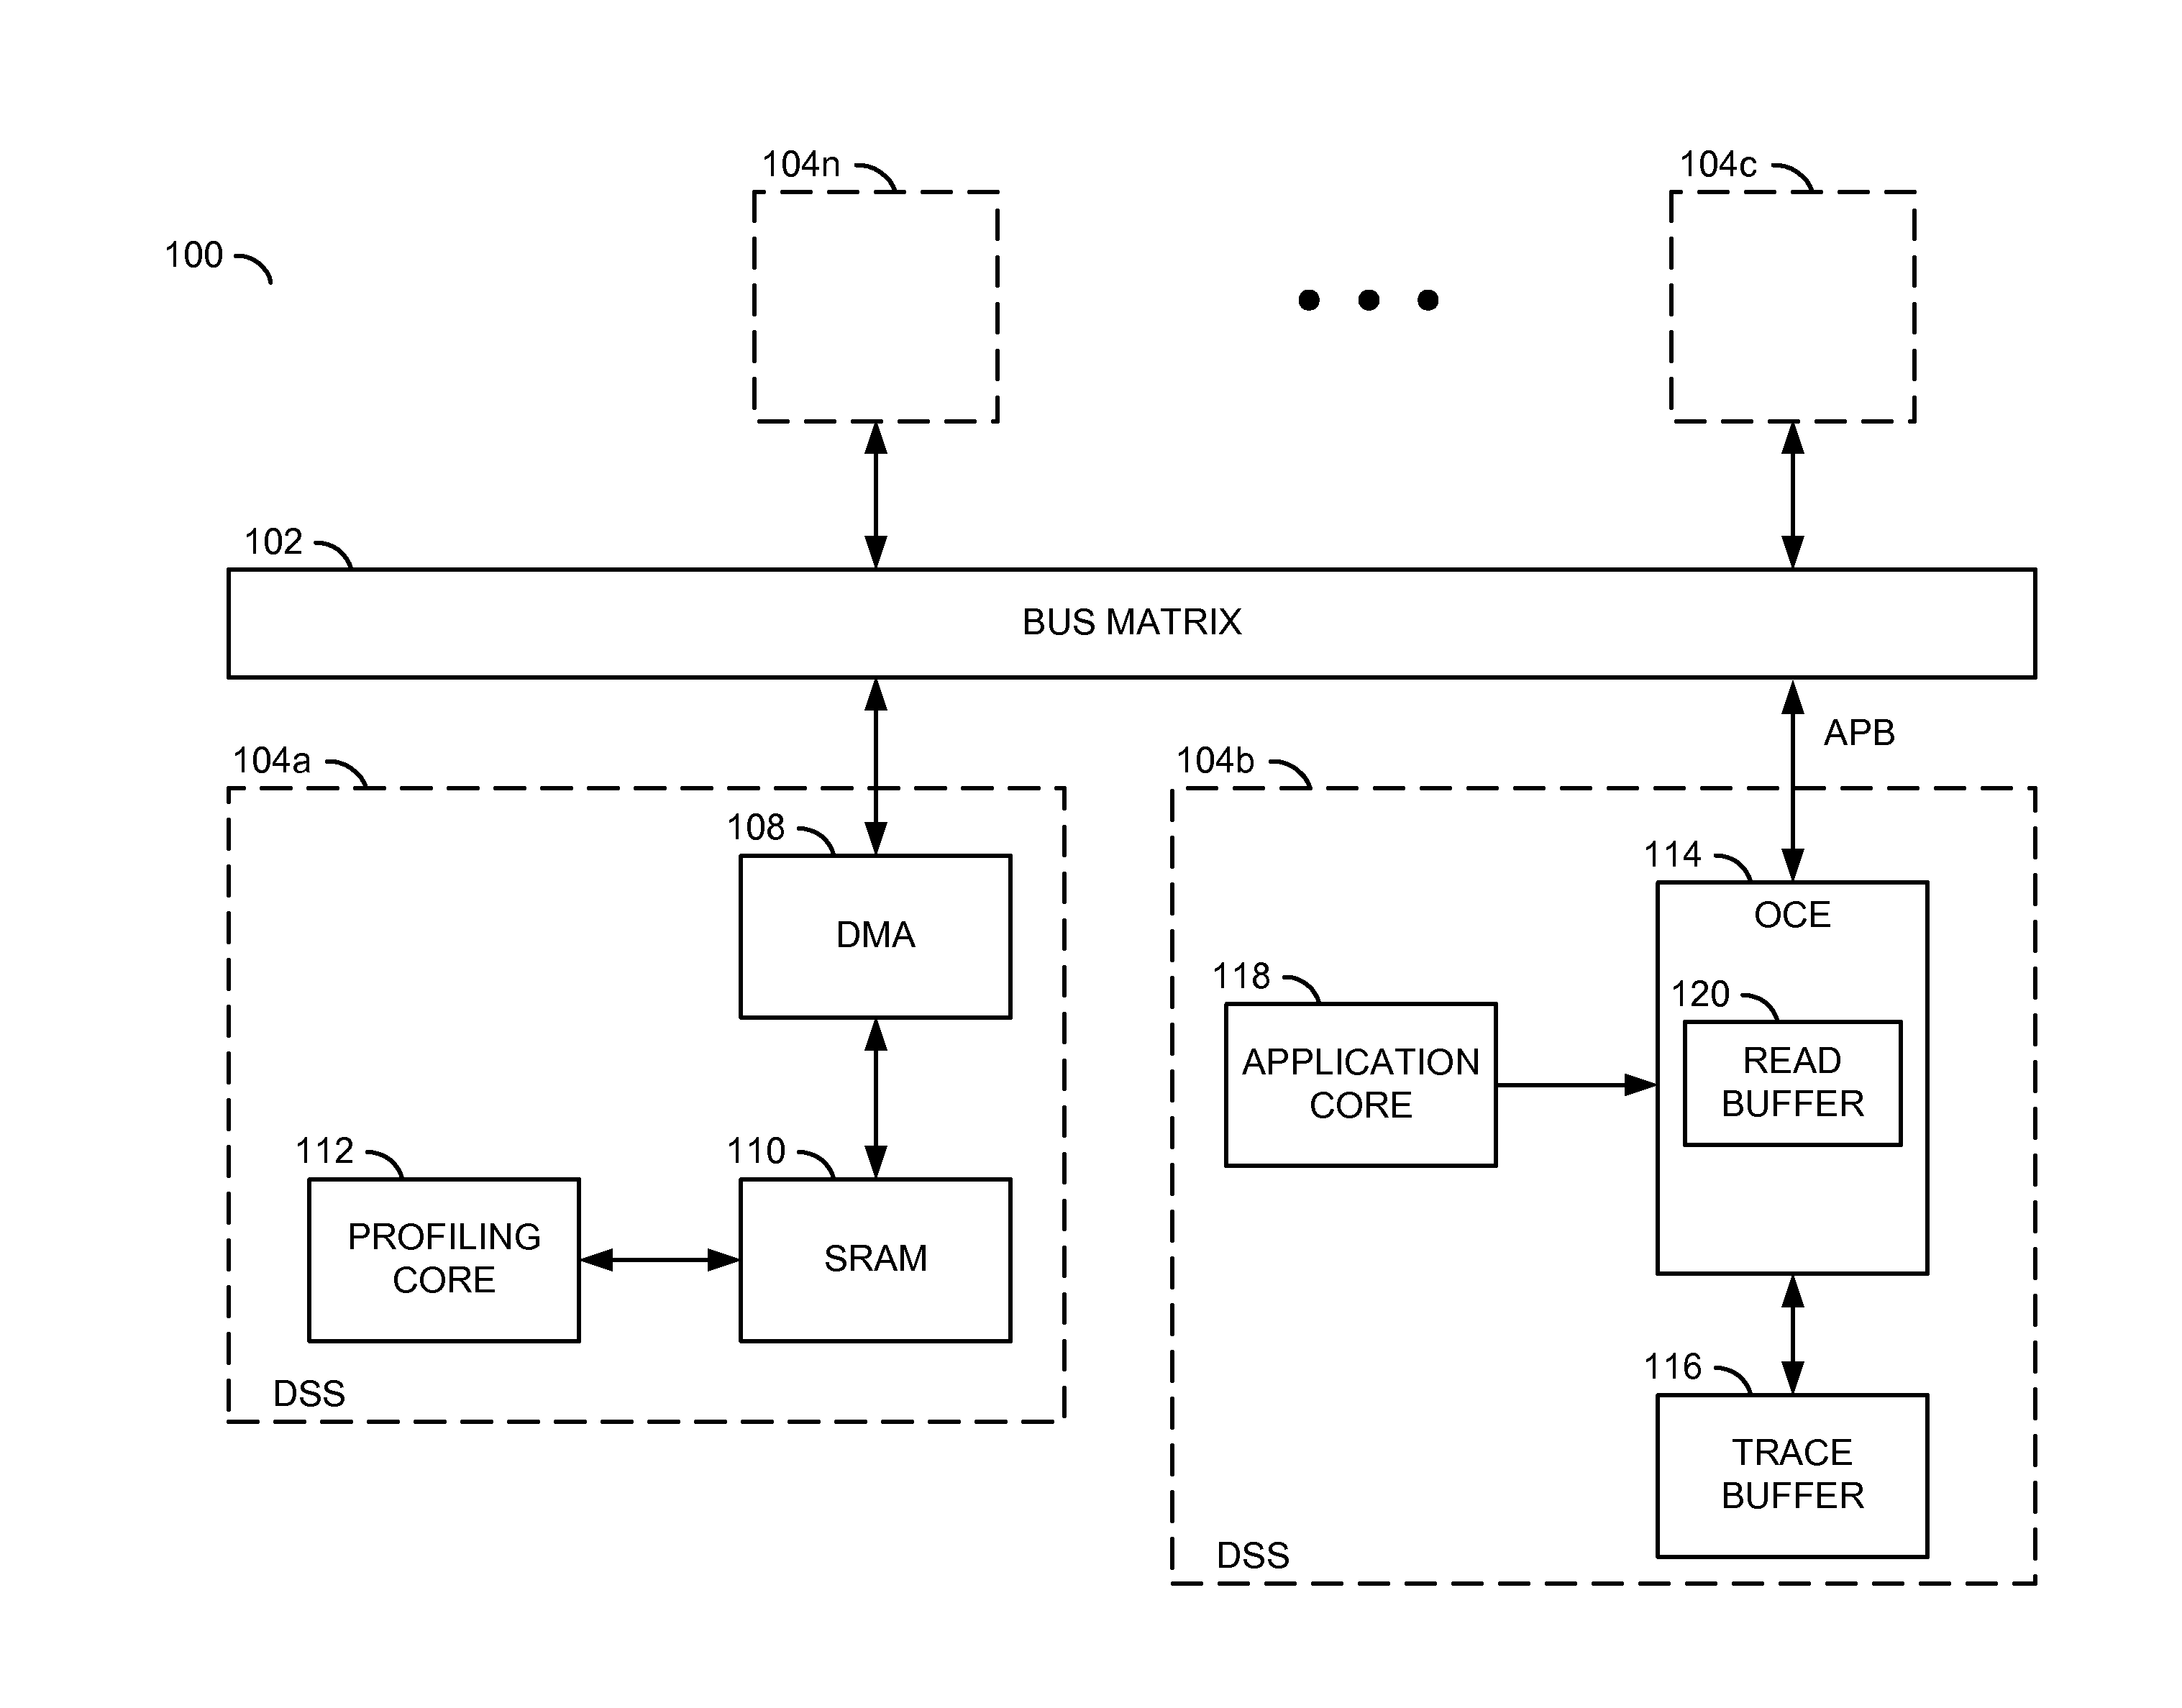 Real-time profiling in a multi-core architecture